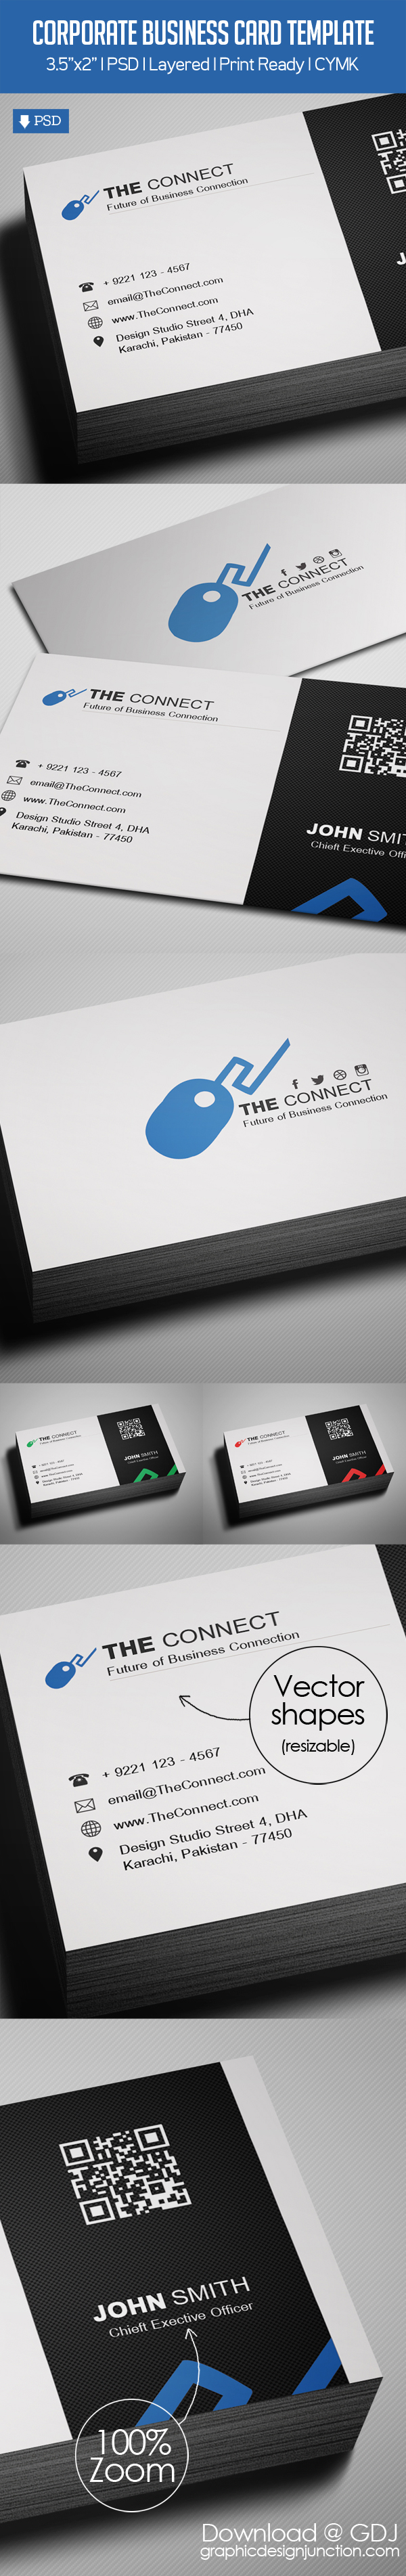 Free Corporate Business Card PSD Template